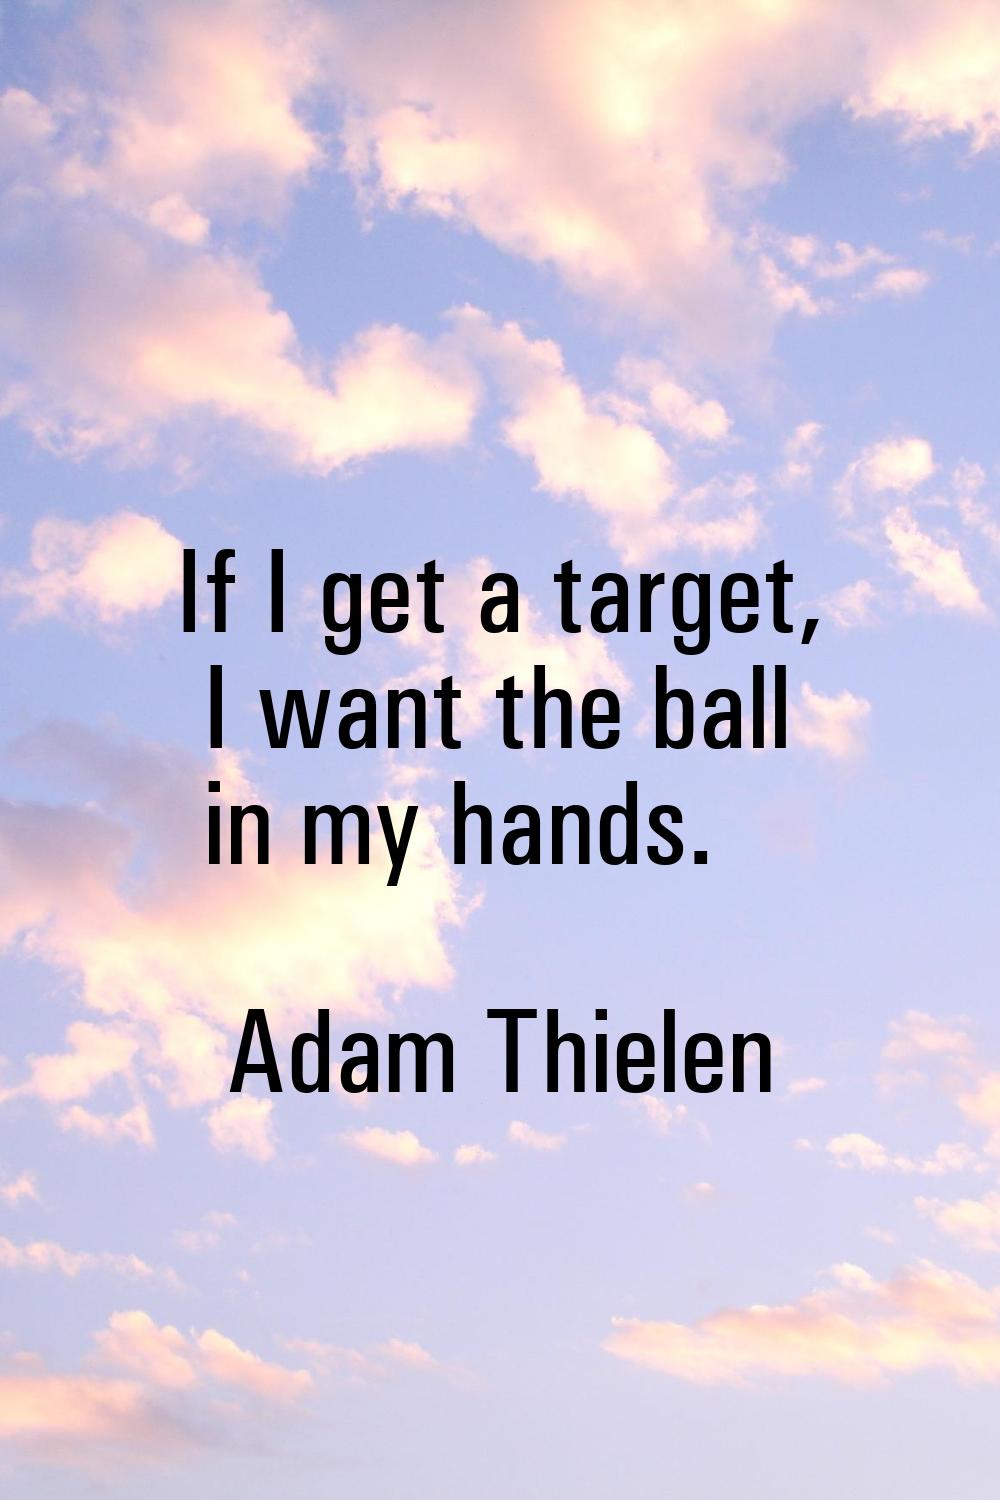 If I get a target, I want the ball in my hands.